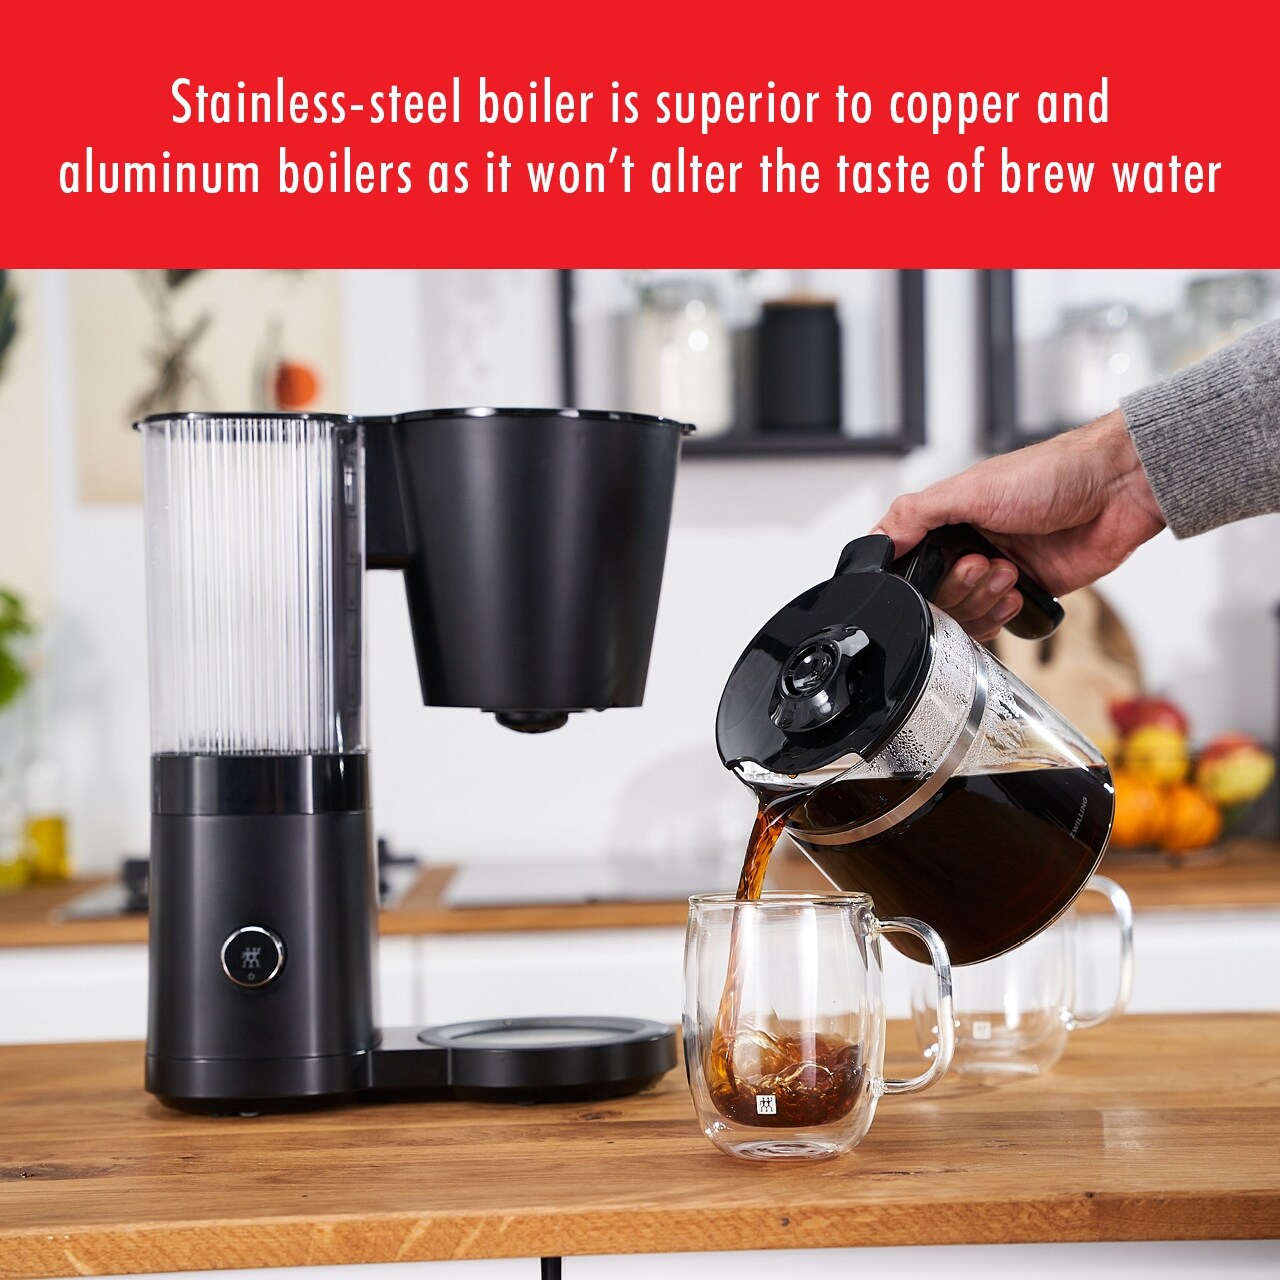 https://ak1.ostkcdn.com/images/products/is/images/direct/339fa9cc0324aeefbc460b447c1e9eac7779f56f/ZWILLING-Enfinigy-Glass-Drip-Coffee-Maker-12-Cup%2C-Black.jpg